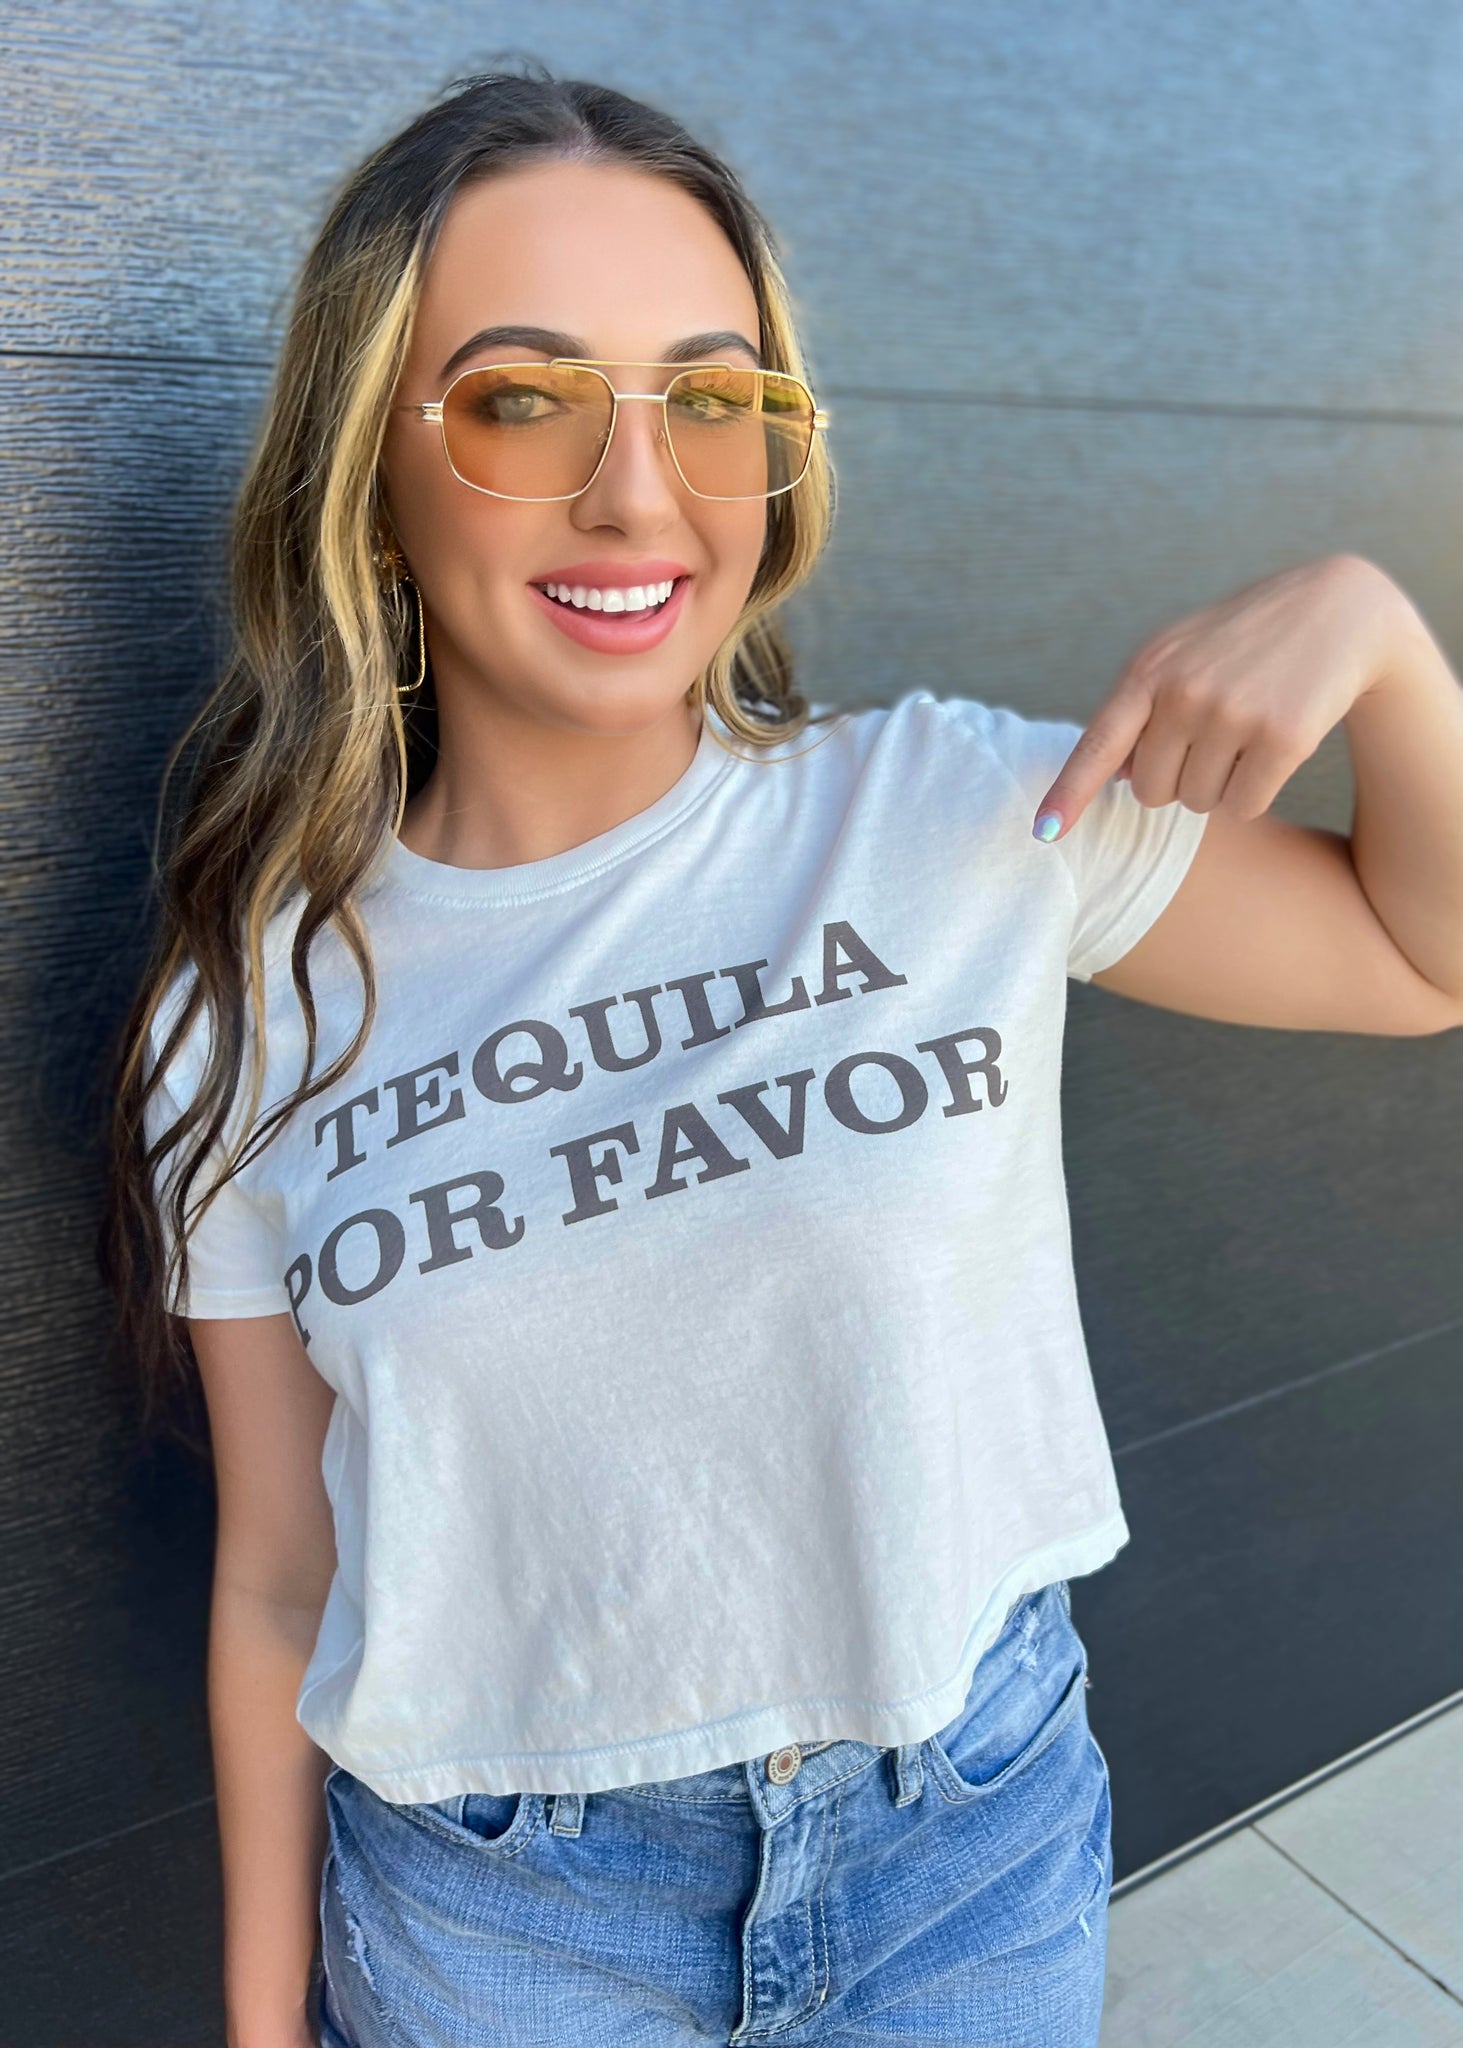 "Tequila Por Favor" Cropped Tee